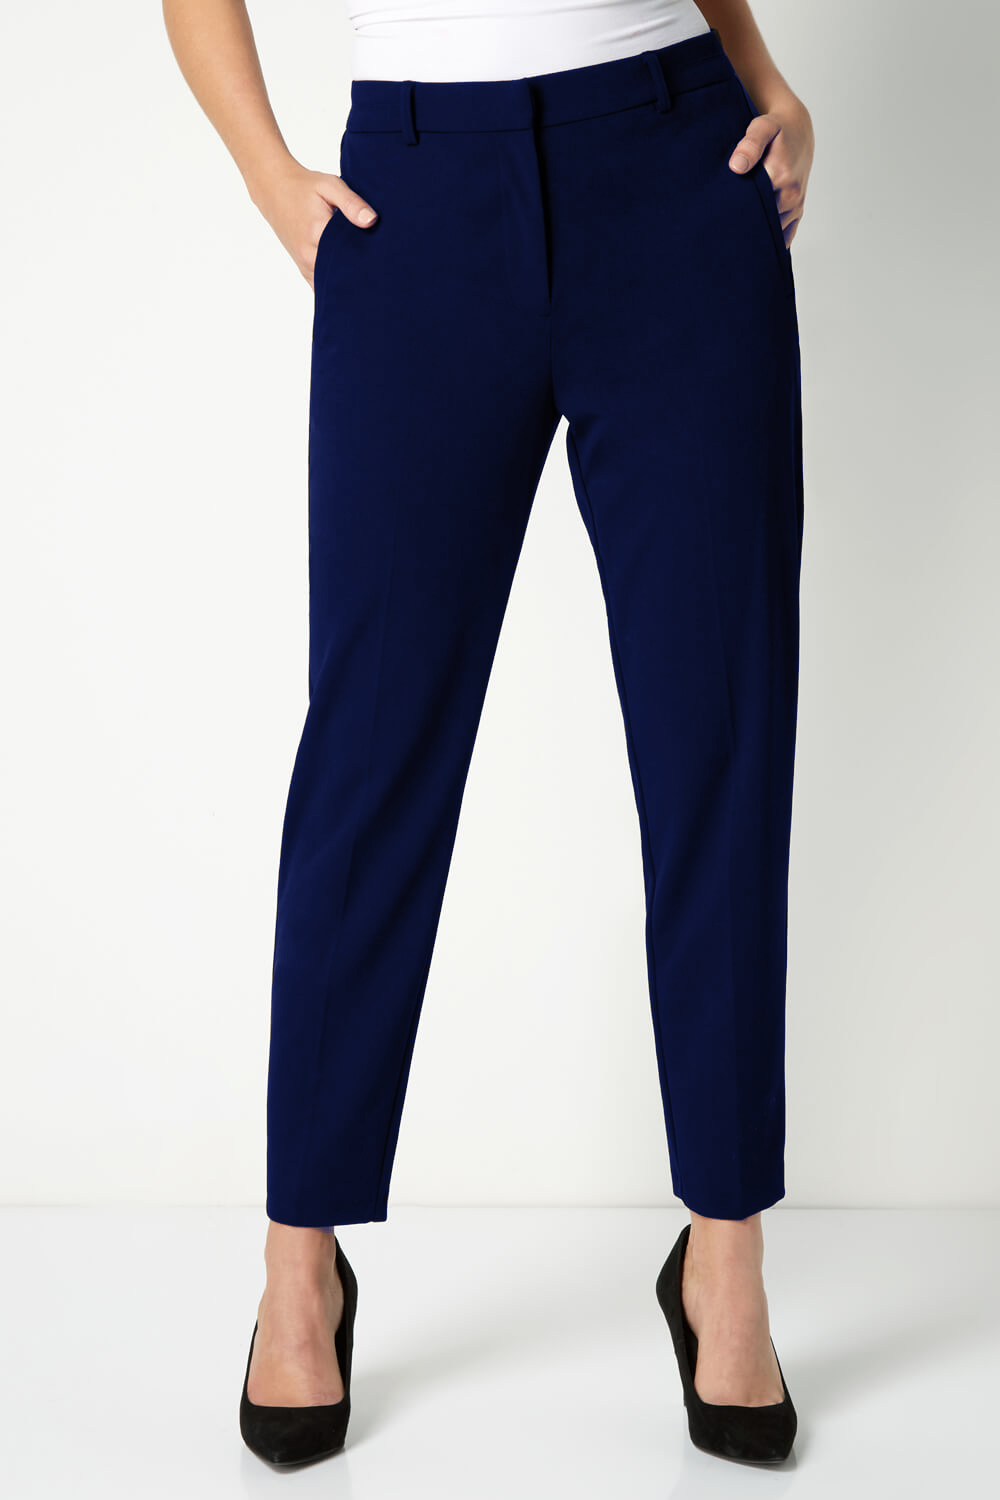 Womens Healthcare Trousers Navy  SHOP ALL WORKWEAR from Simon Jersey UK